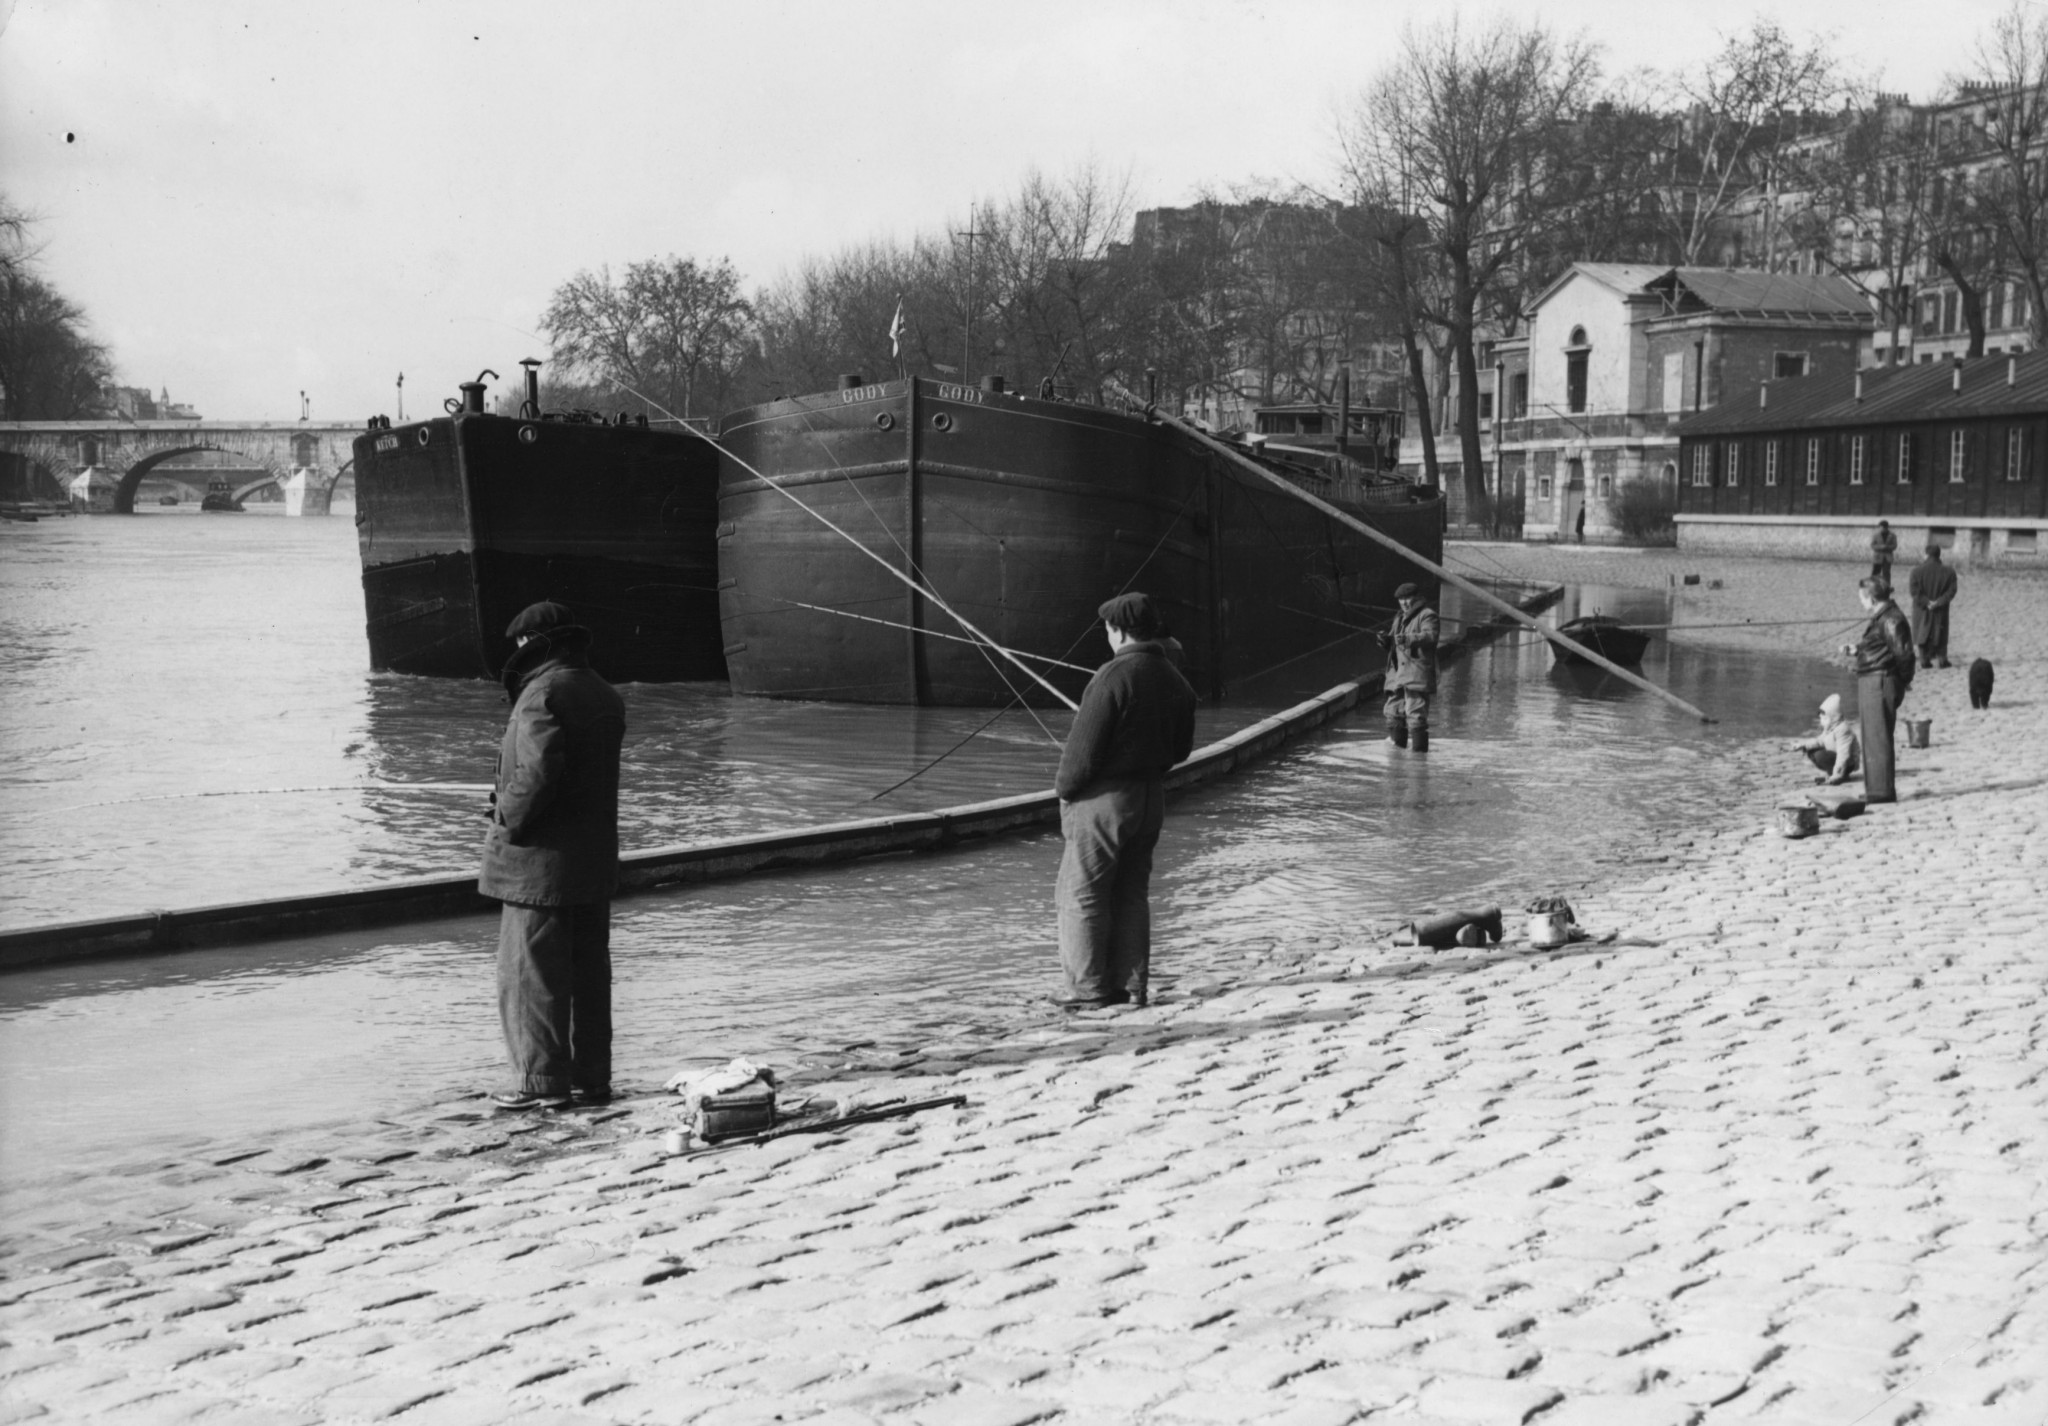 Fishermen on the River Seine in 1957 ©Getty Images